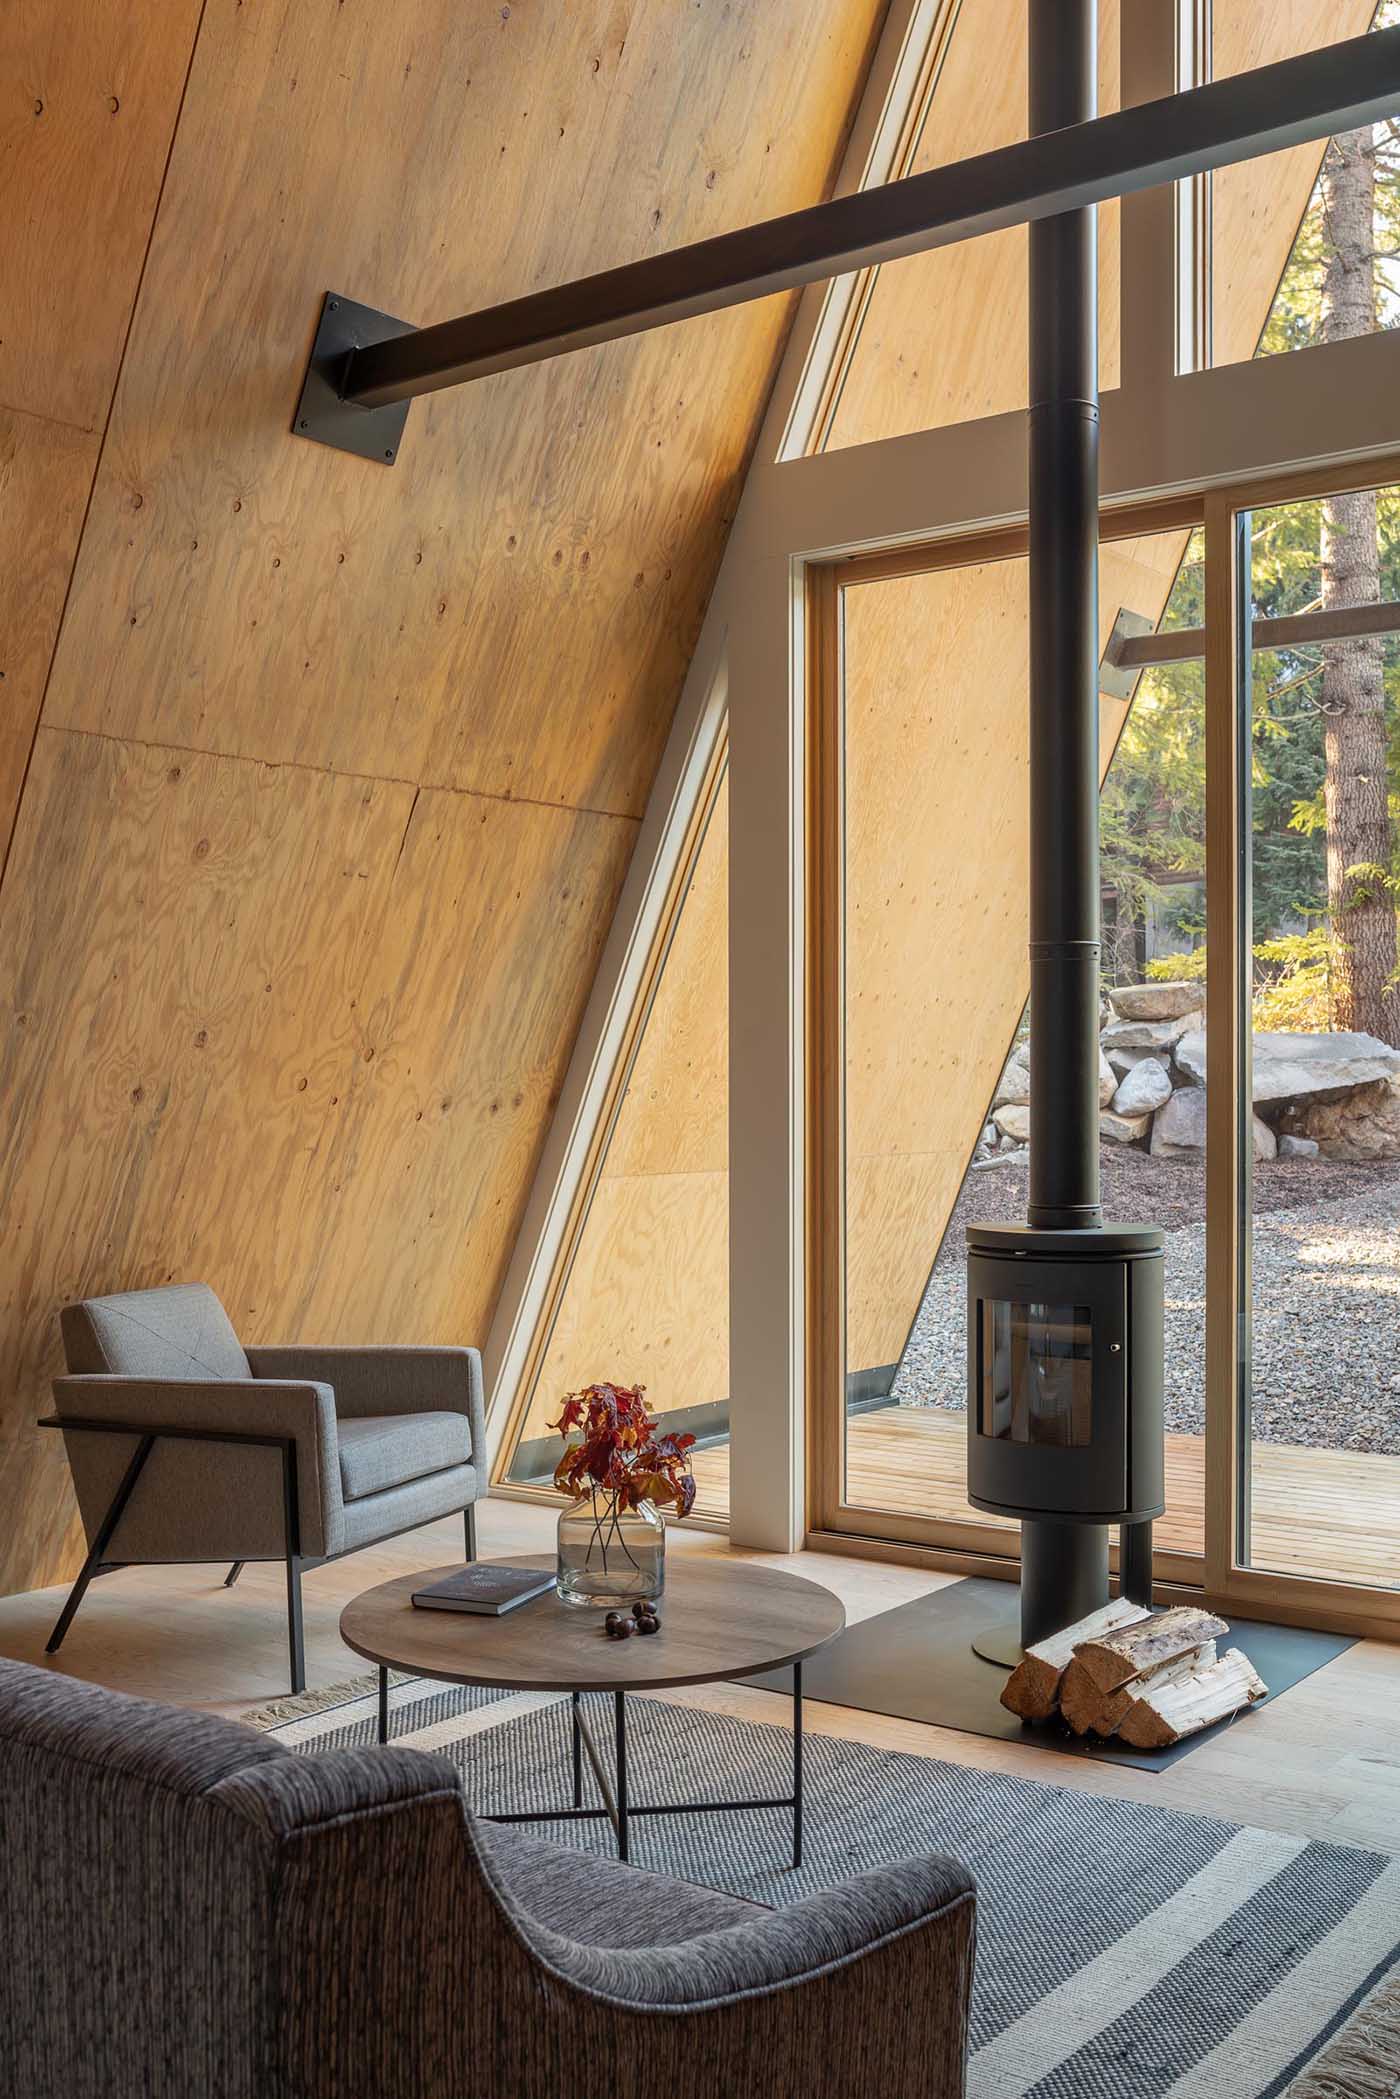 The cozy wood-lined interior of this A-frame cabin includes a fireplace with a black finish that complements the other metal elements. Sliding glass doors open to covered verandahs.